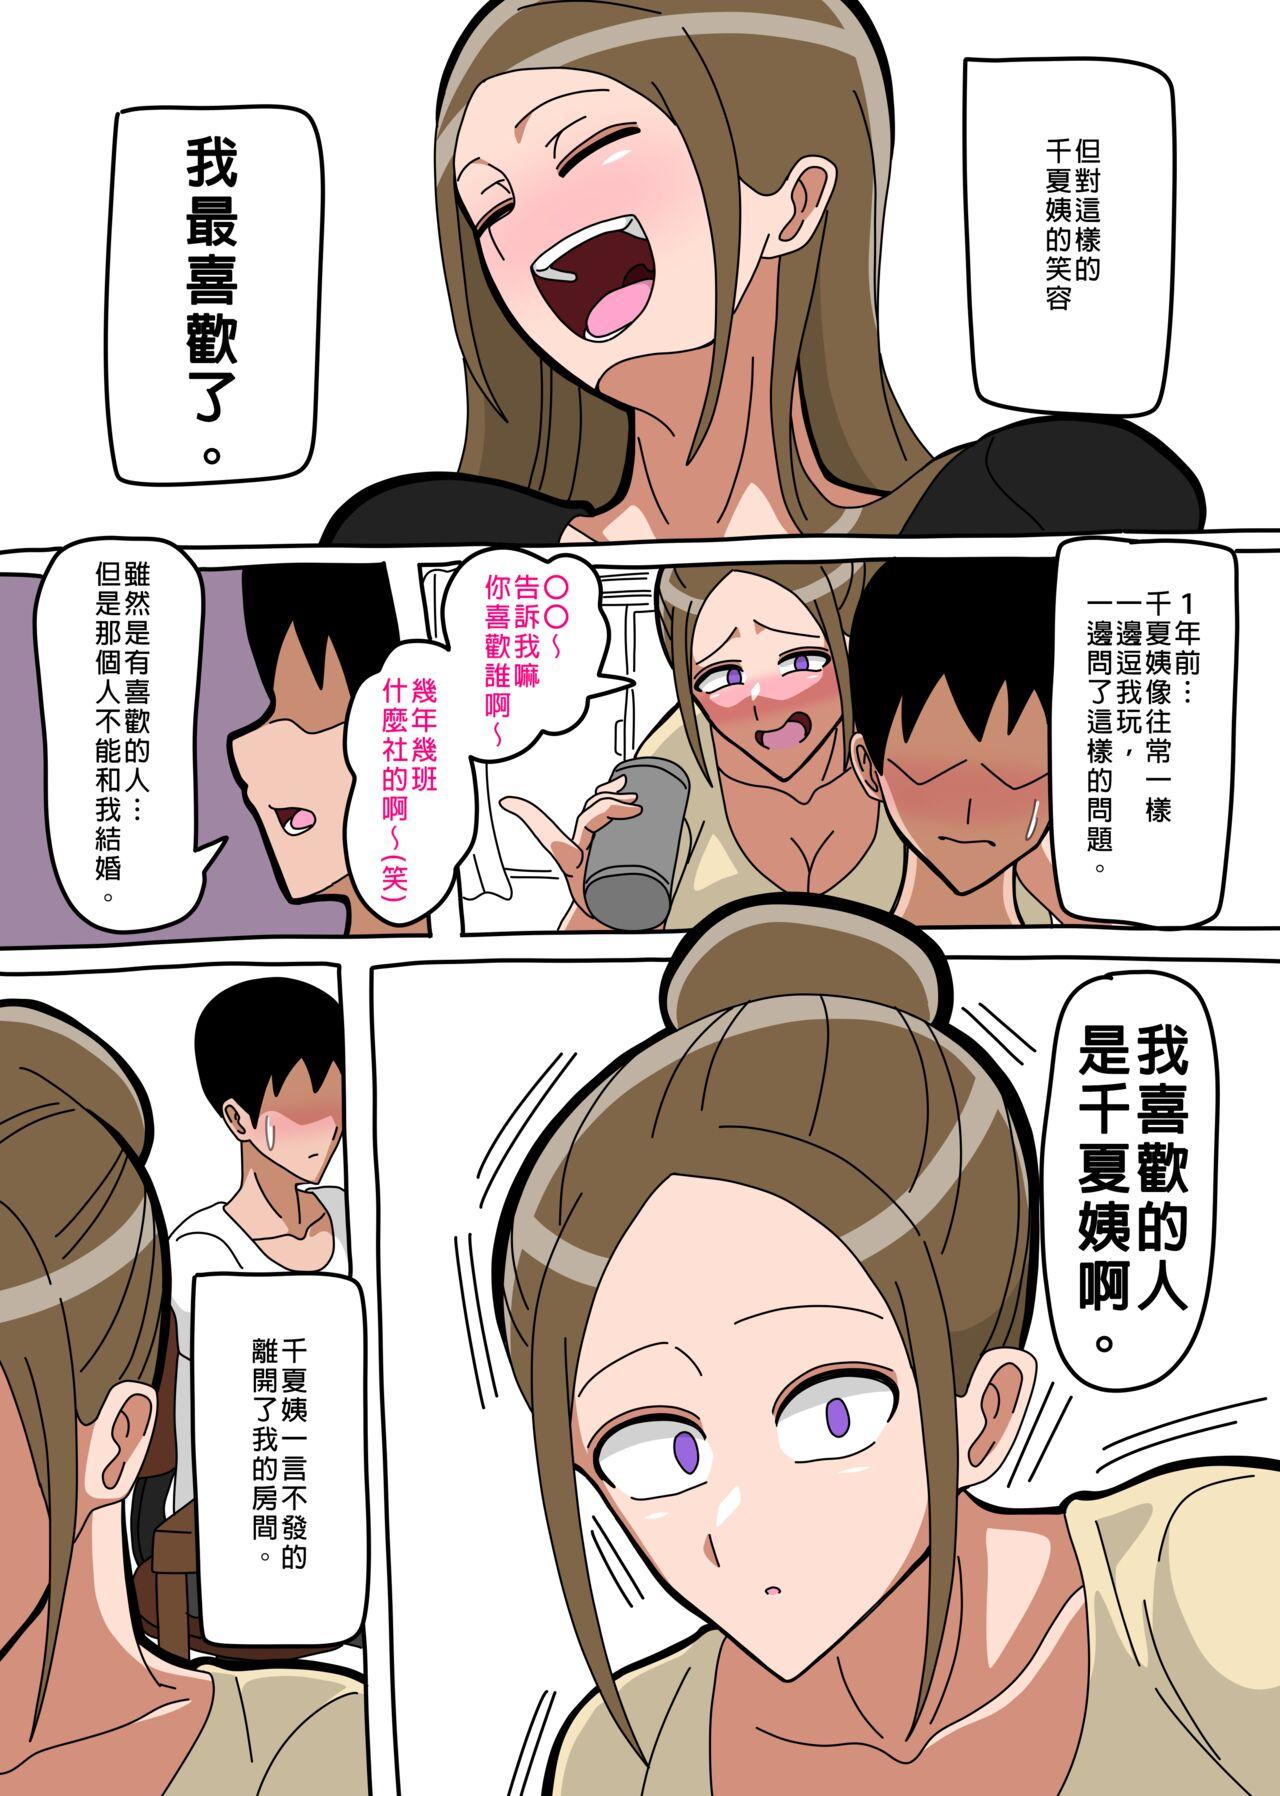 Family Roleplay Aunt Chinatsu 千夏姨 Facebook - Page 2